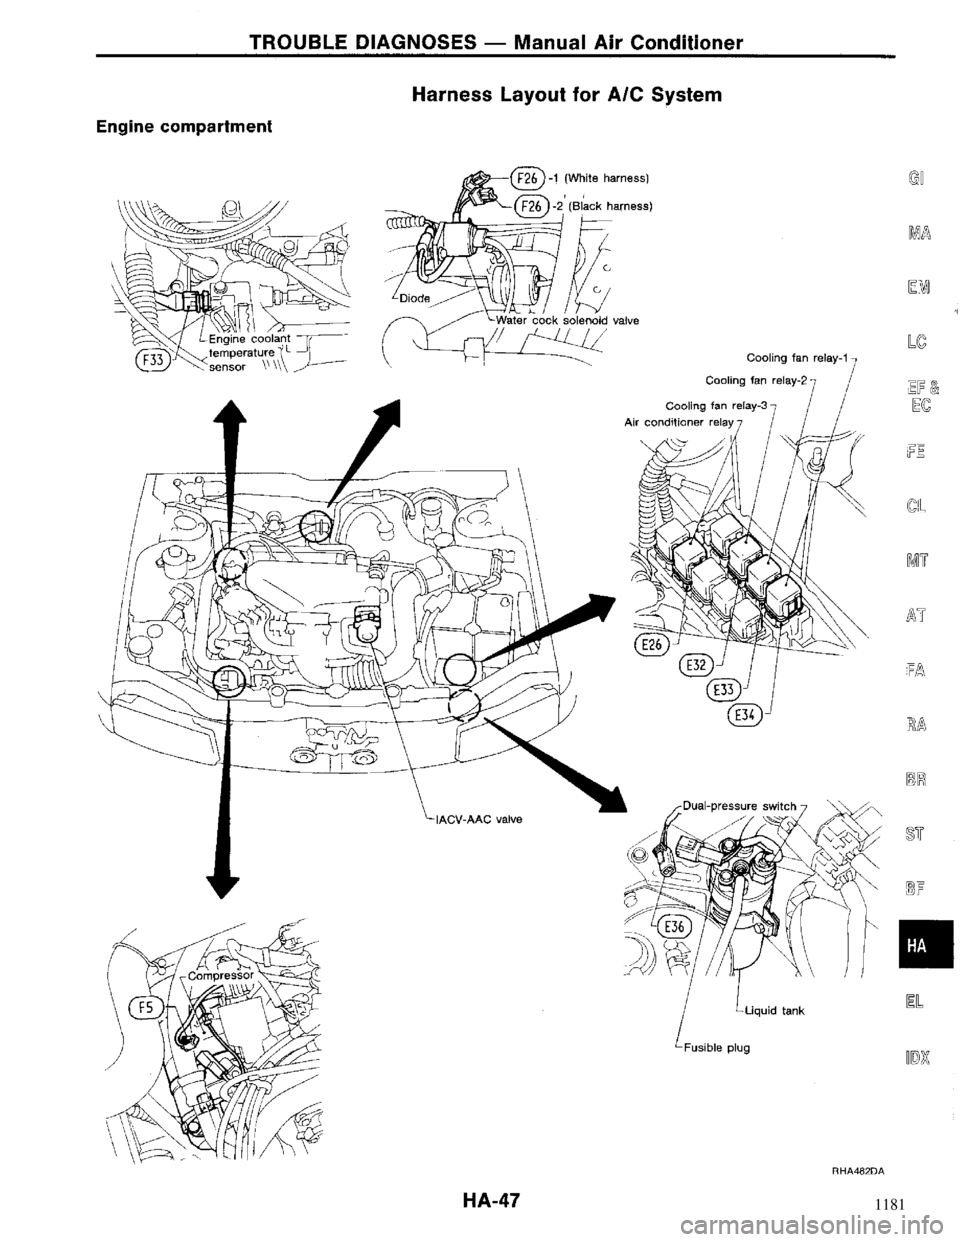 NISSAN MAXIMA 1994 A32 / 4.G Heather And Air Conditioner Service Manual 1181 